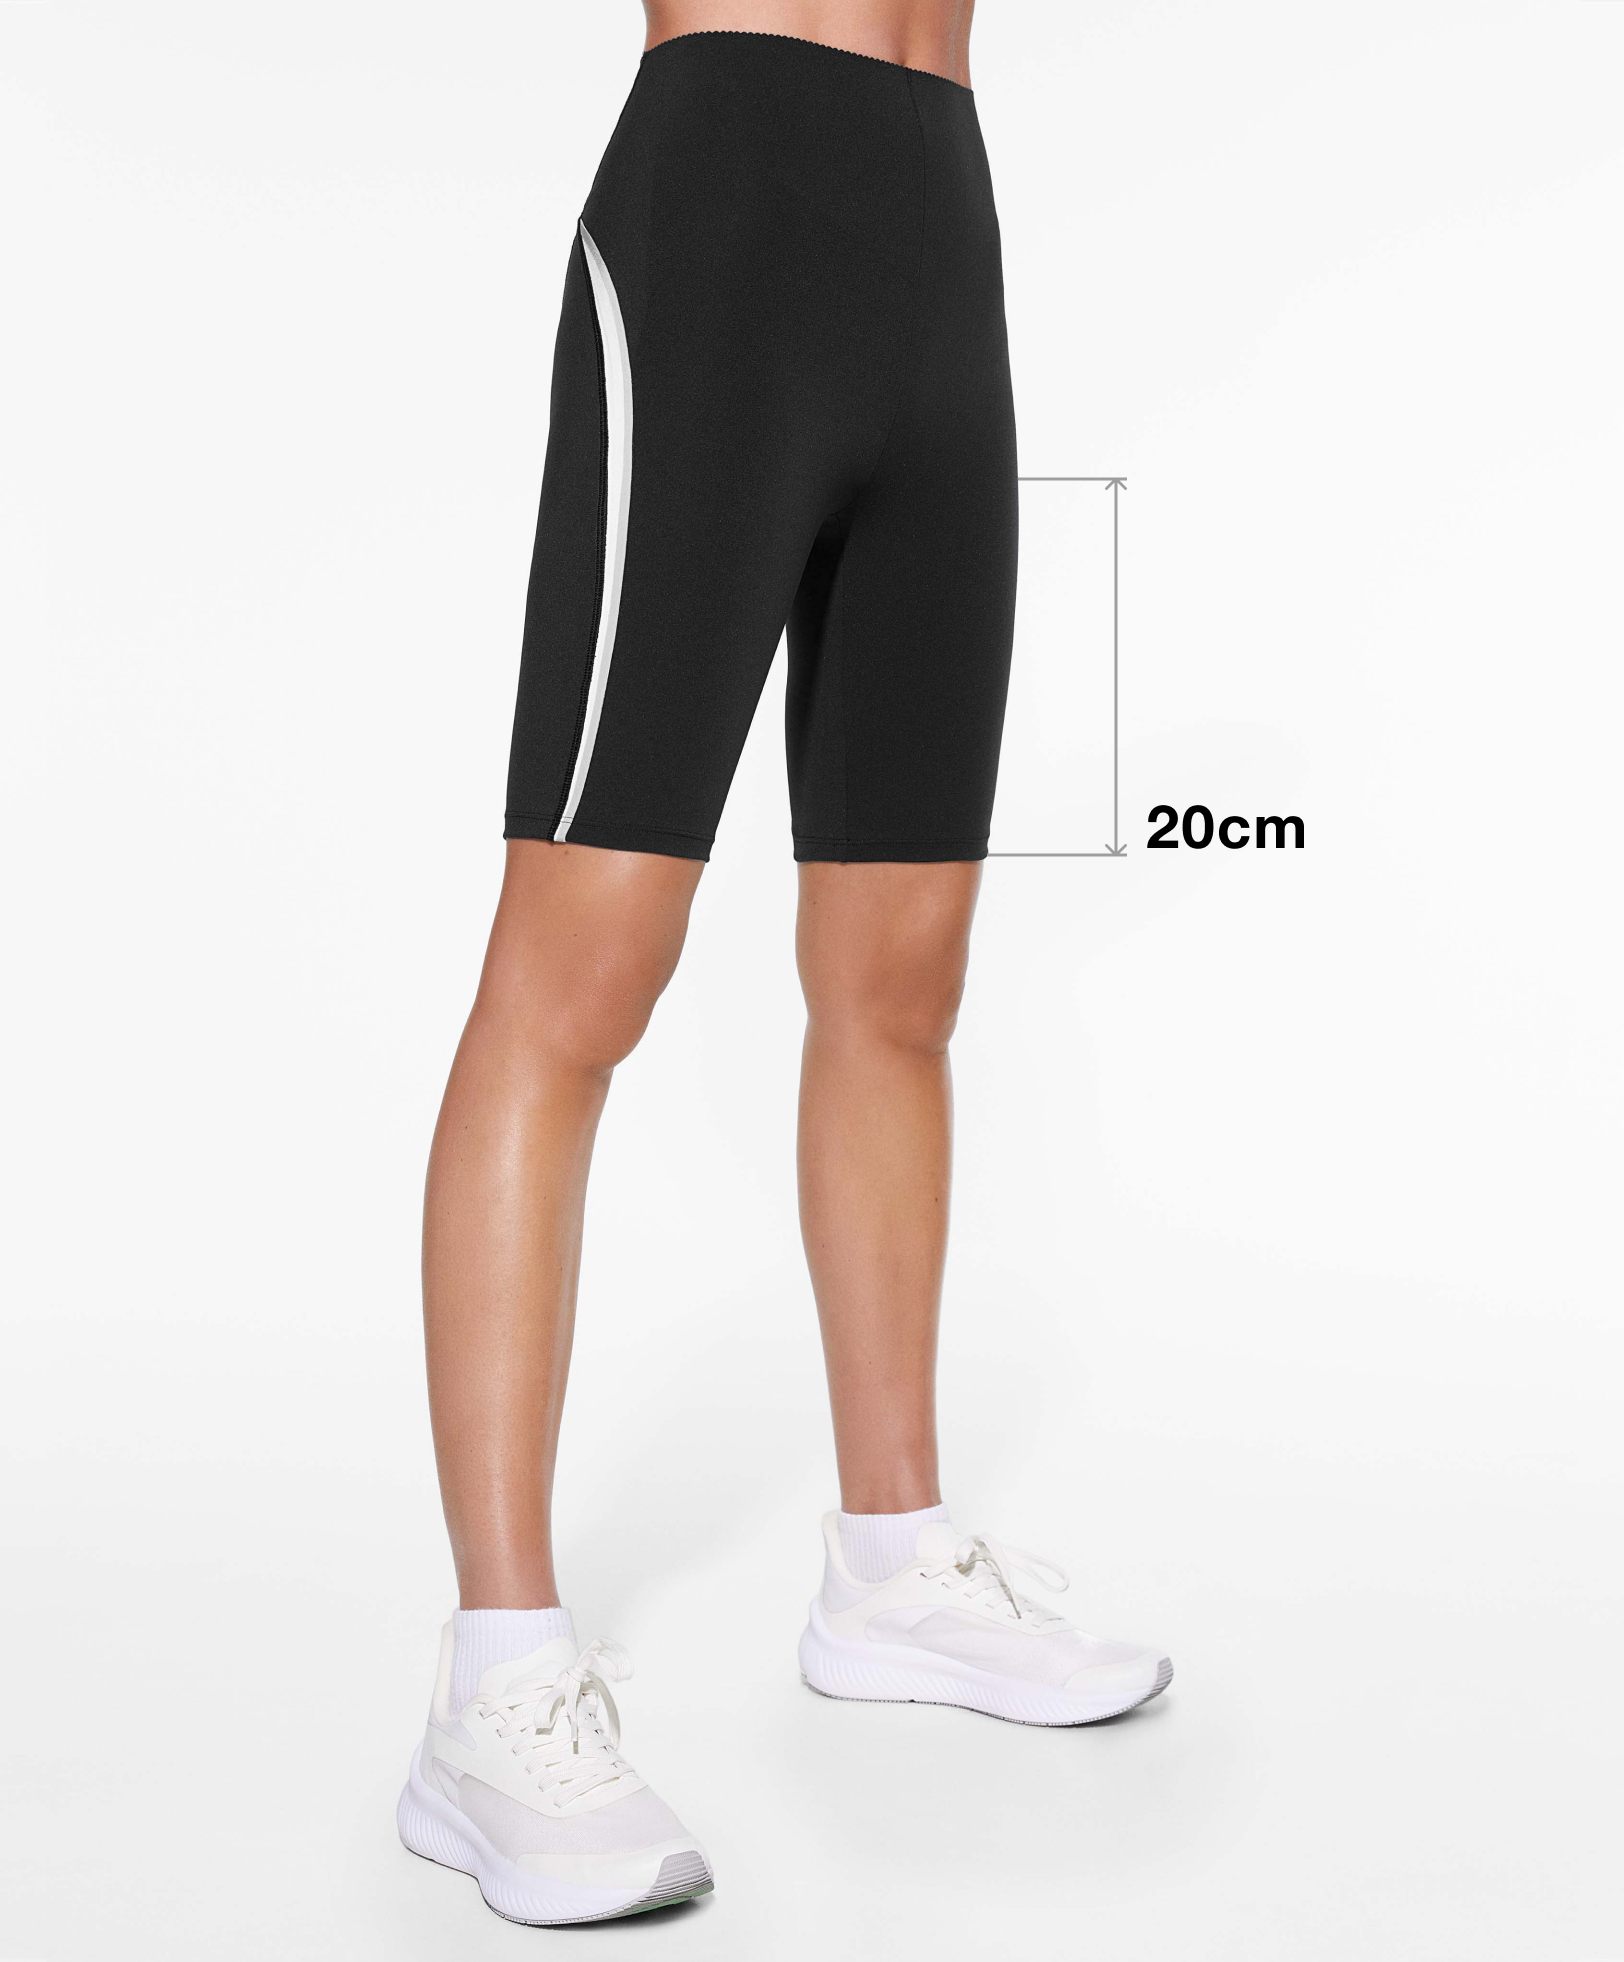 Microperforated 25cm compressive cycle shorts